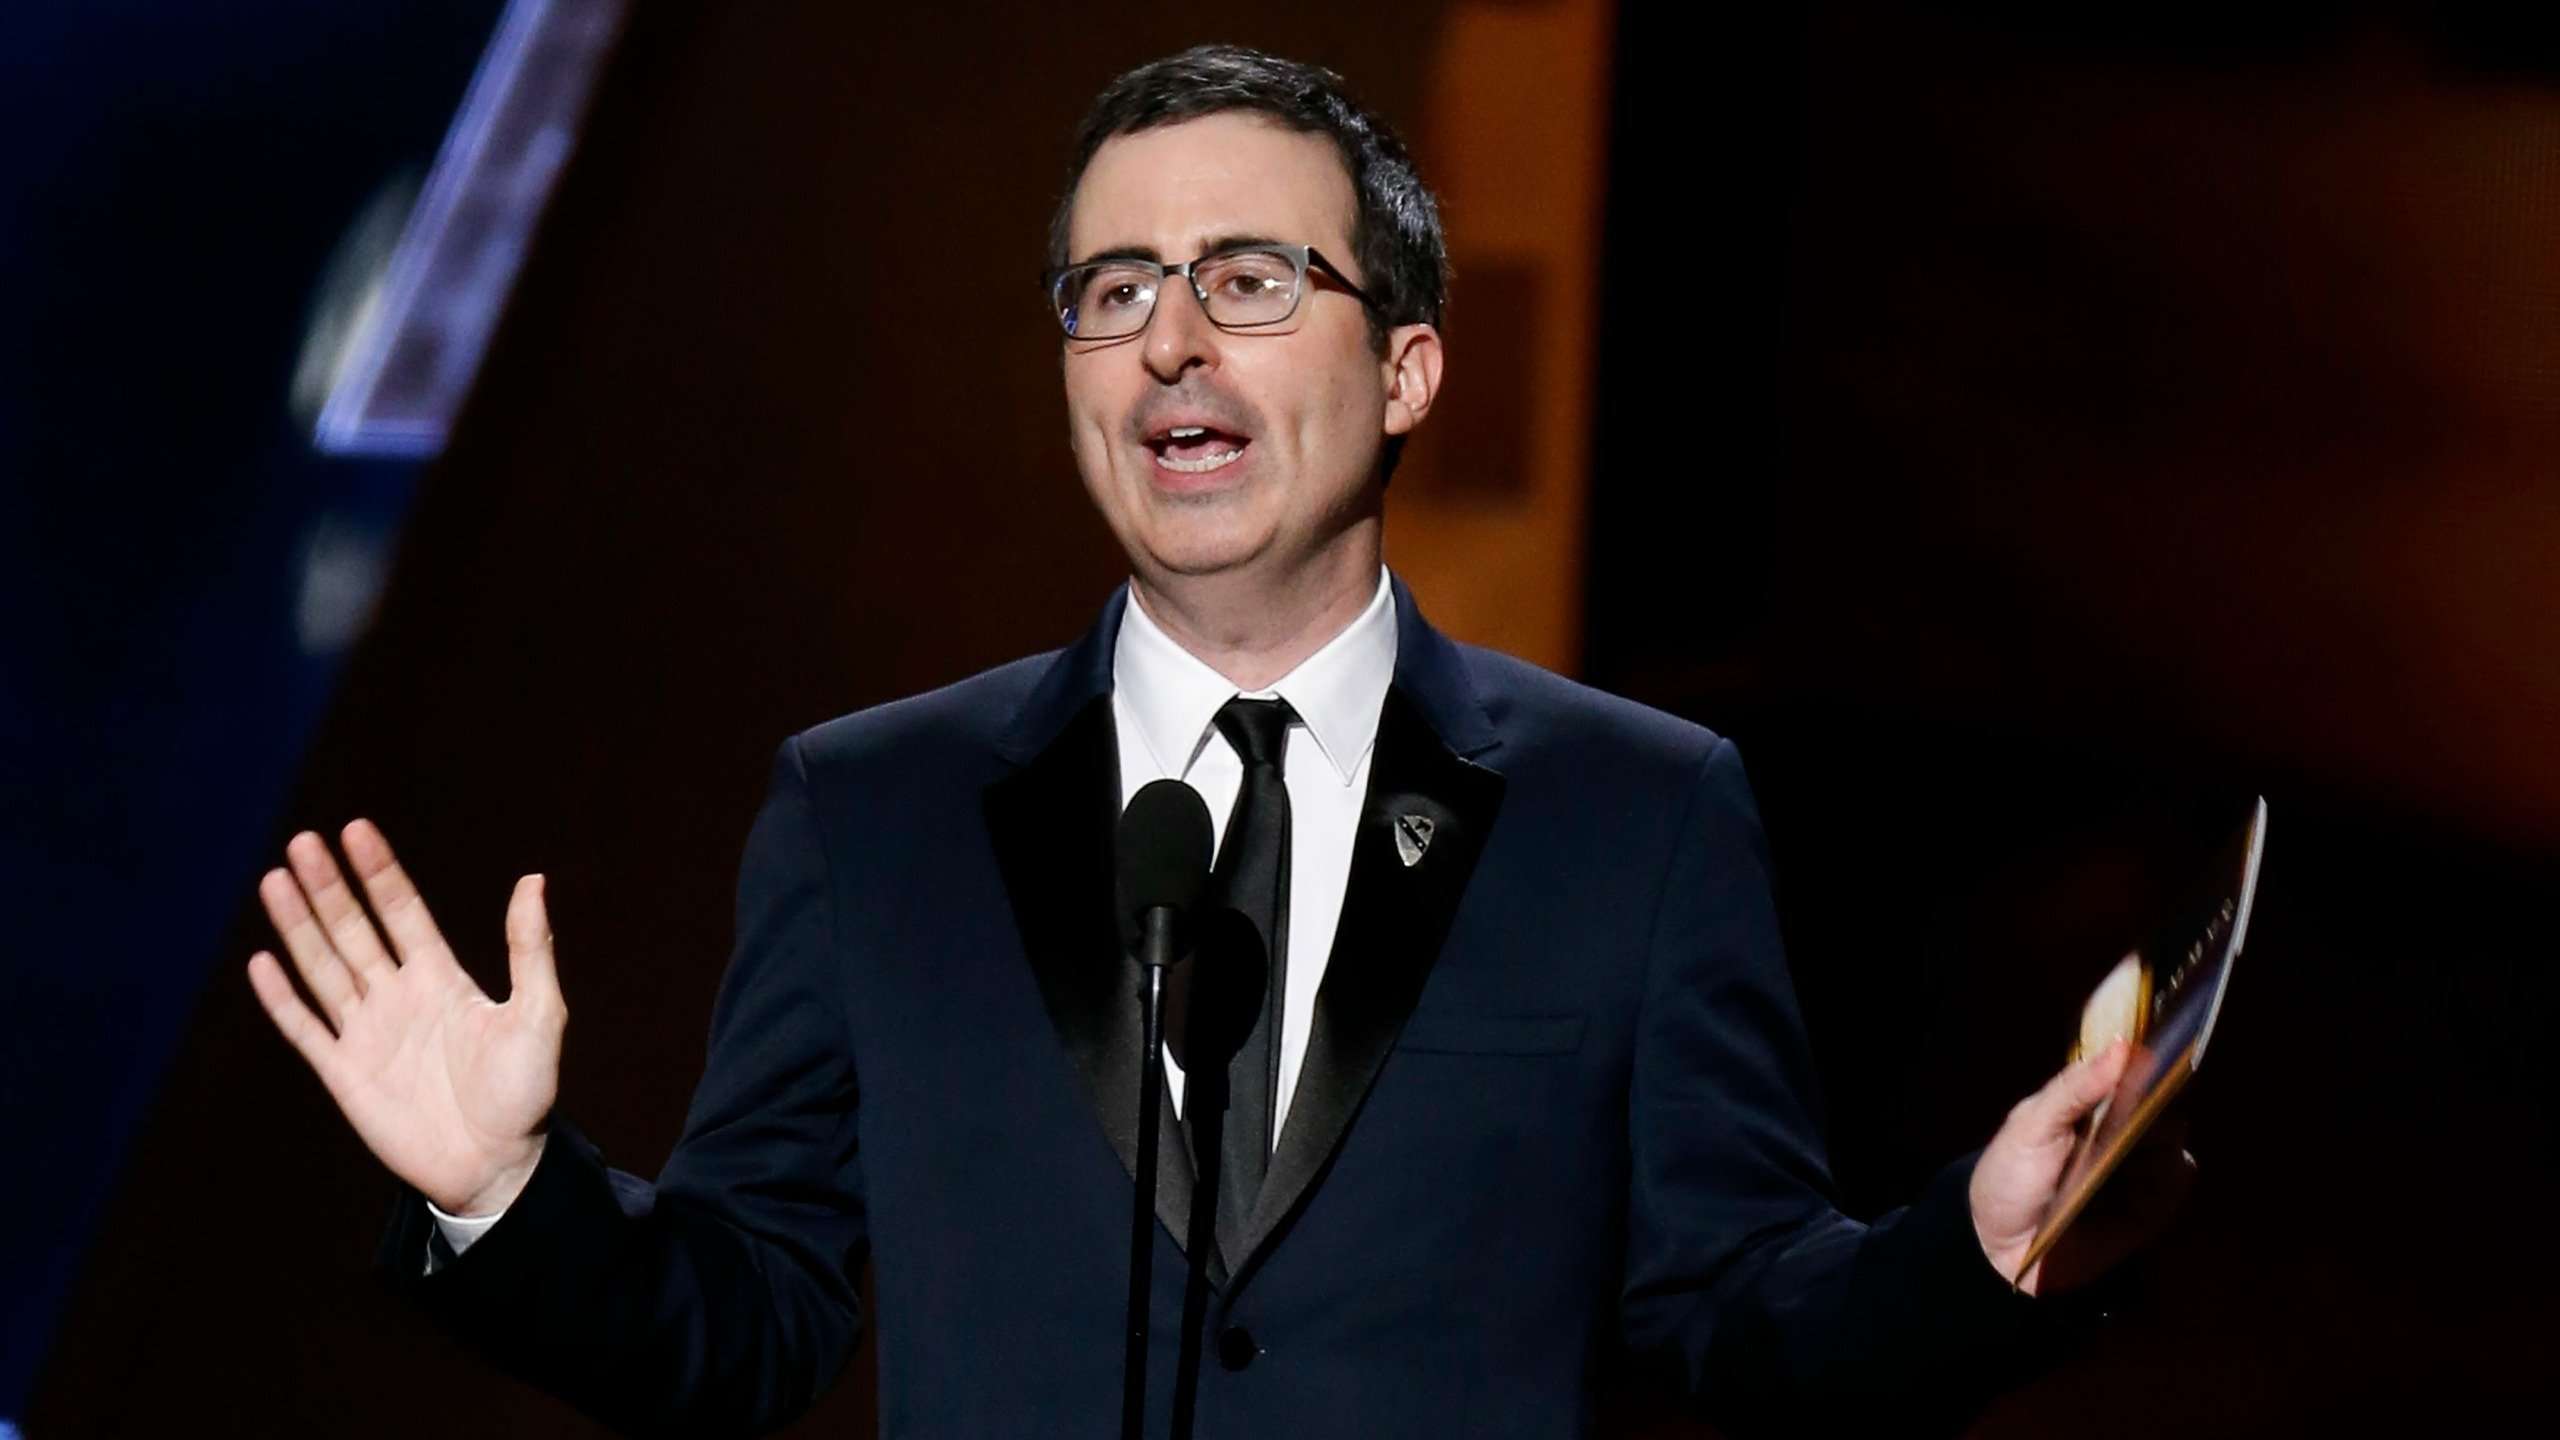 image for Republican Coal King Sues HBO Over John Oliver’s Show